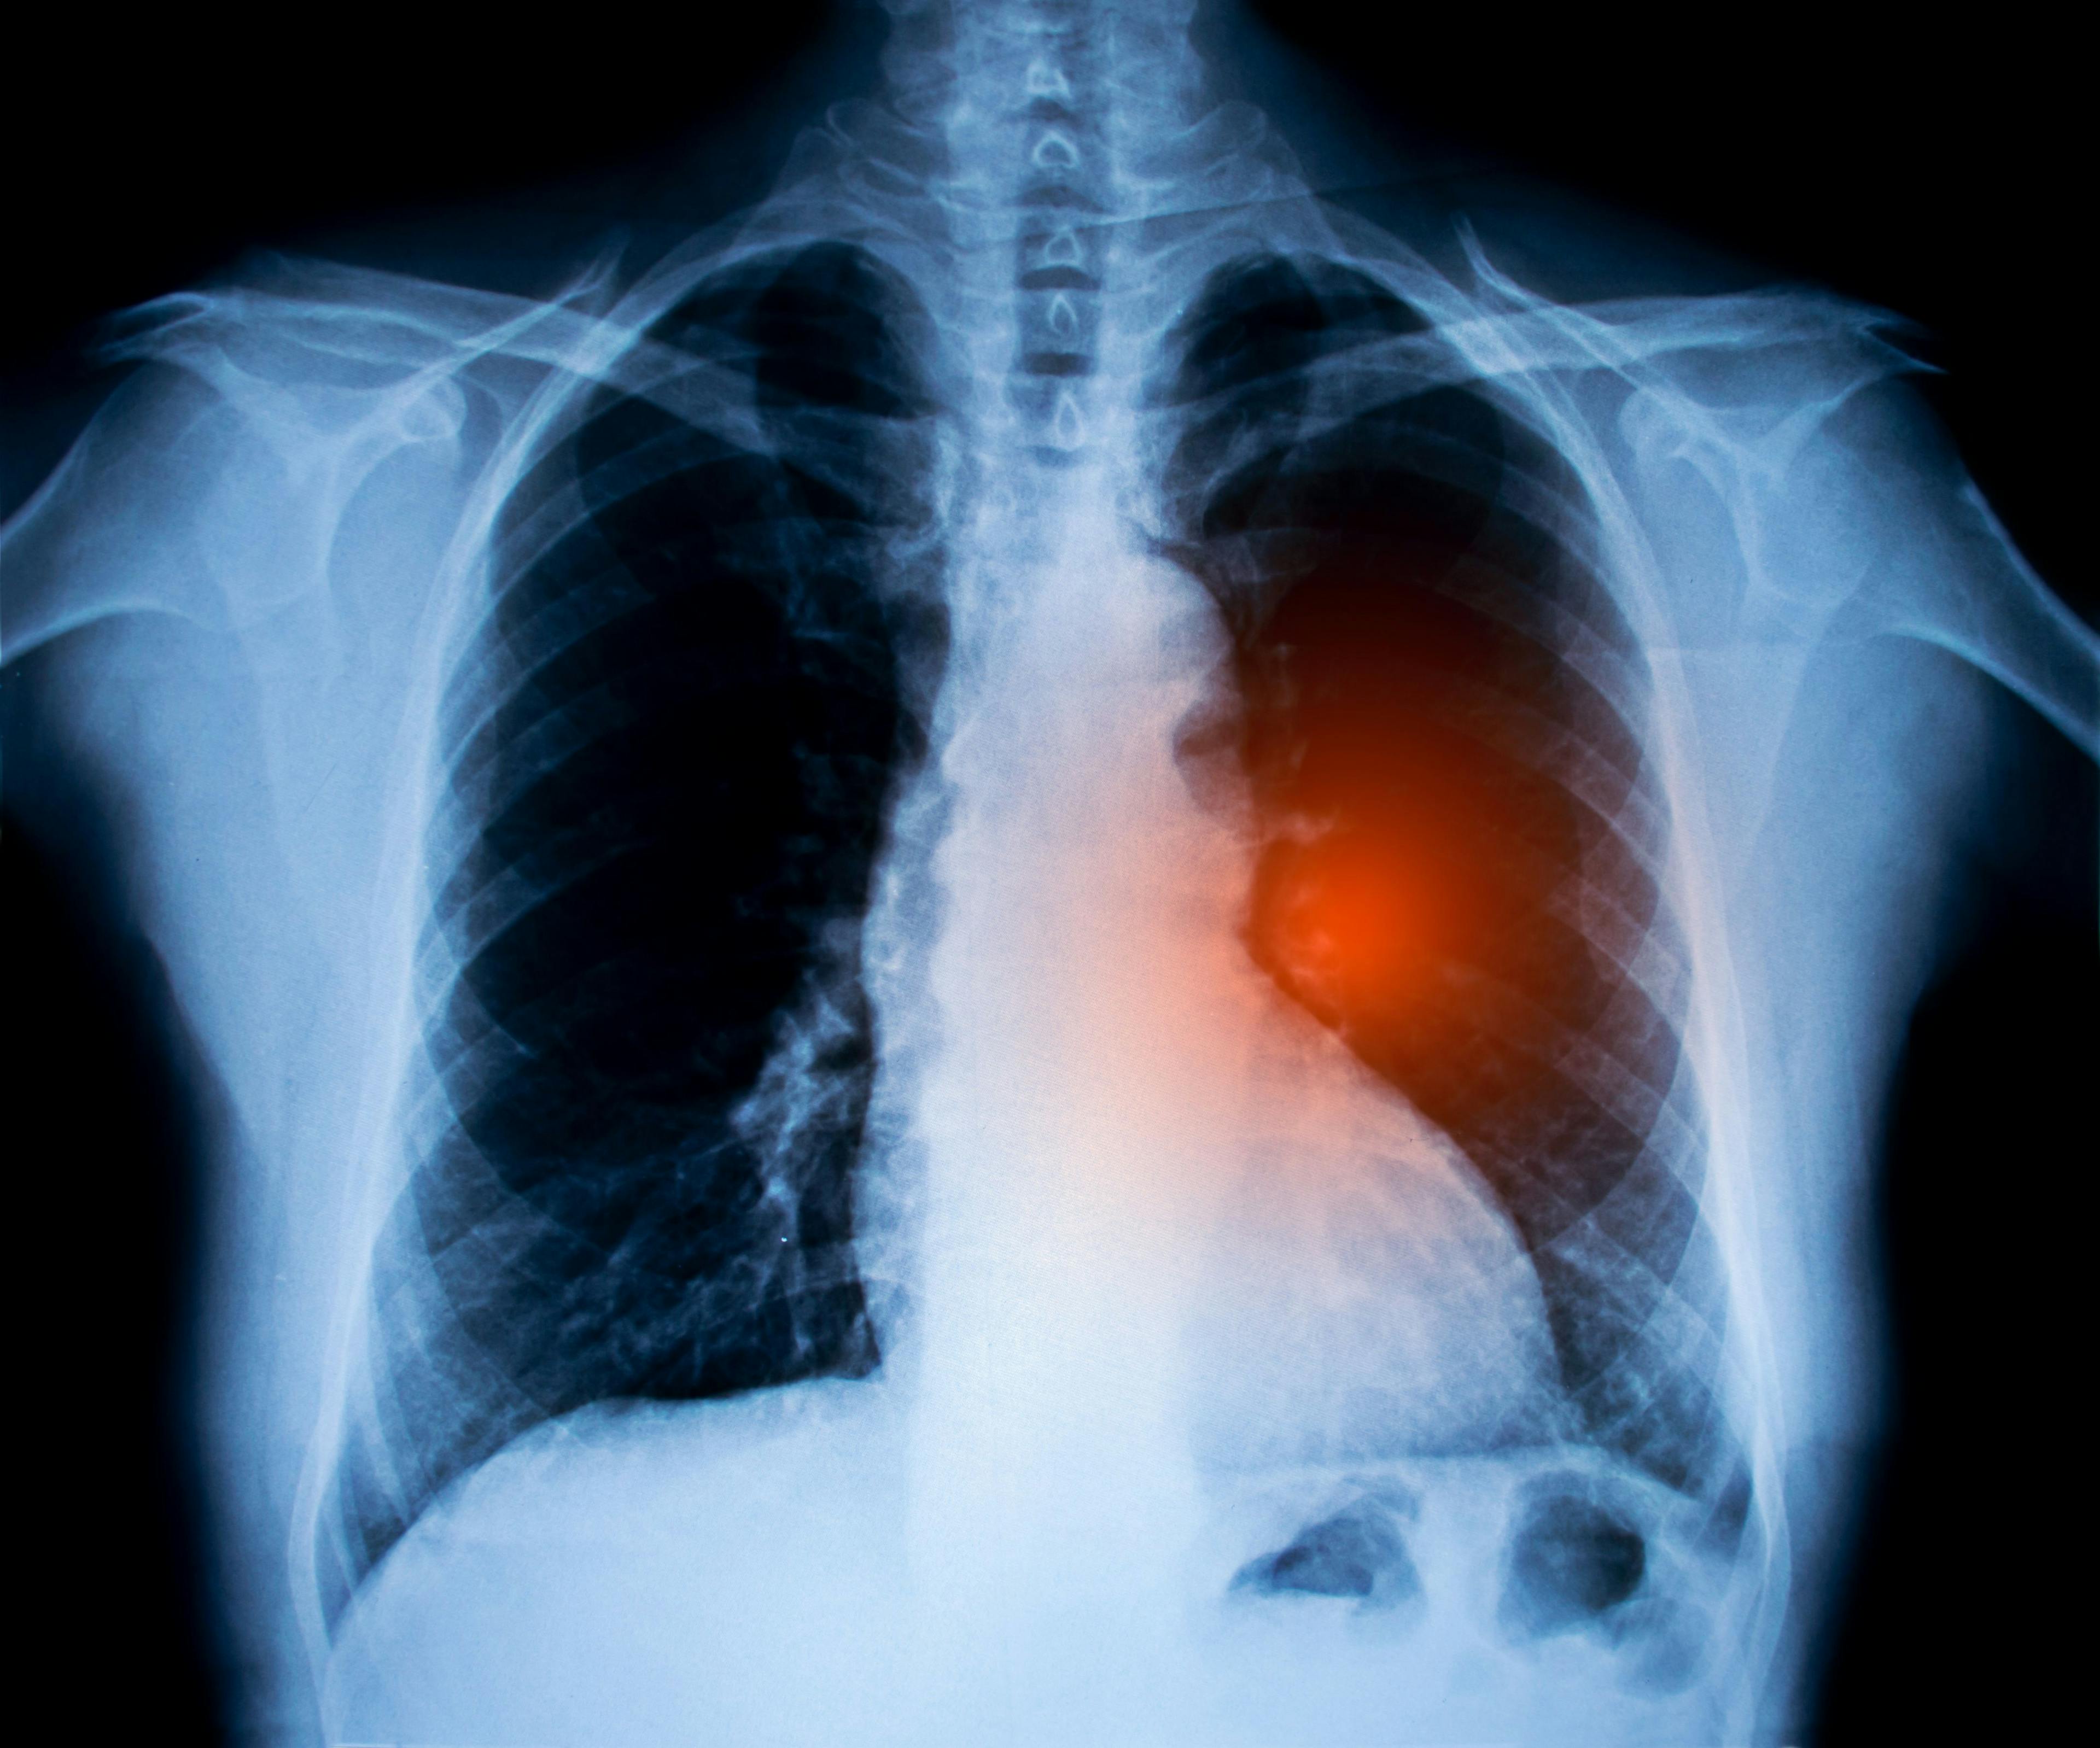 X-ray image of chest. Lung cancer concept - Image credit: cunaplus | stock.adobe.com